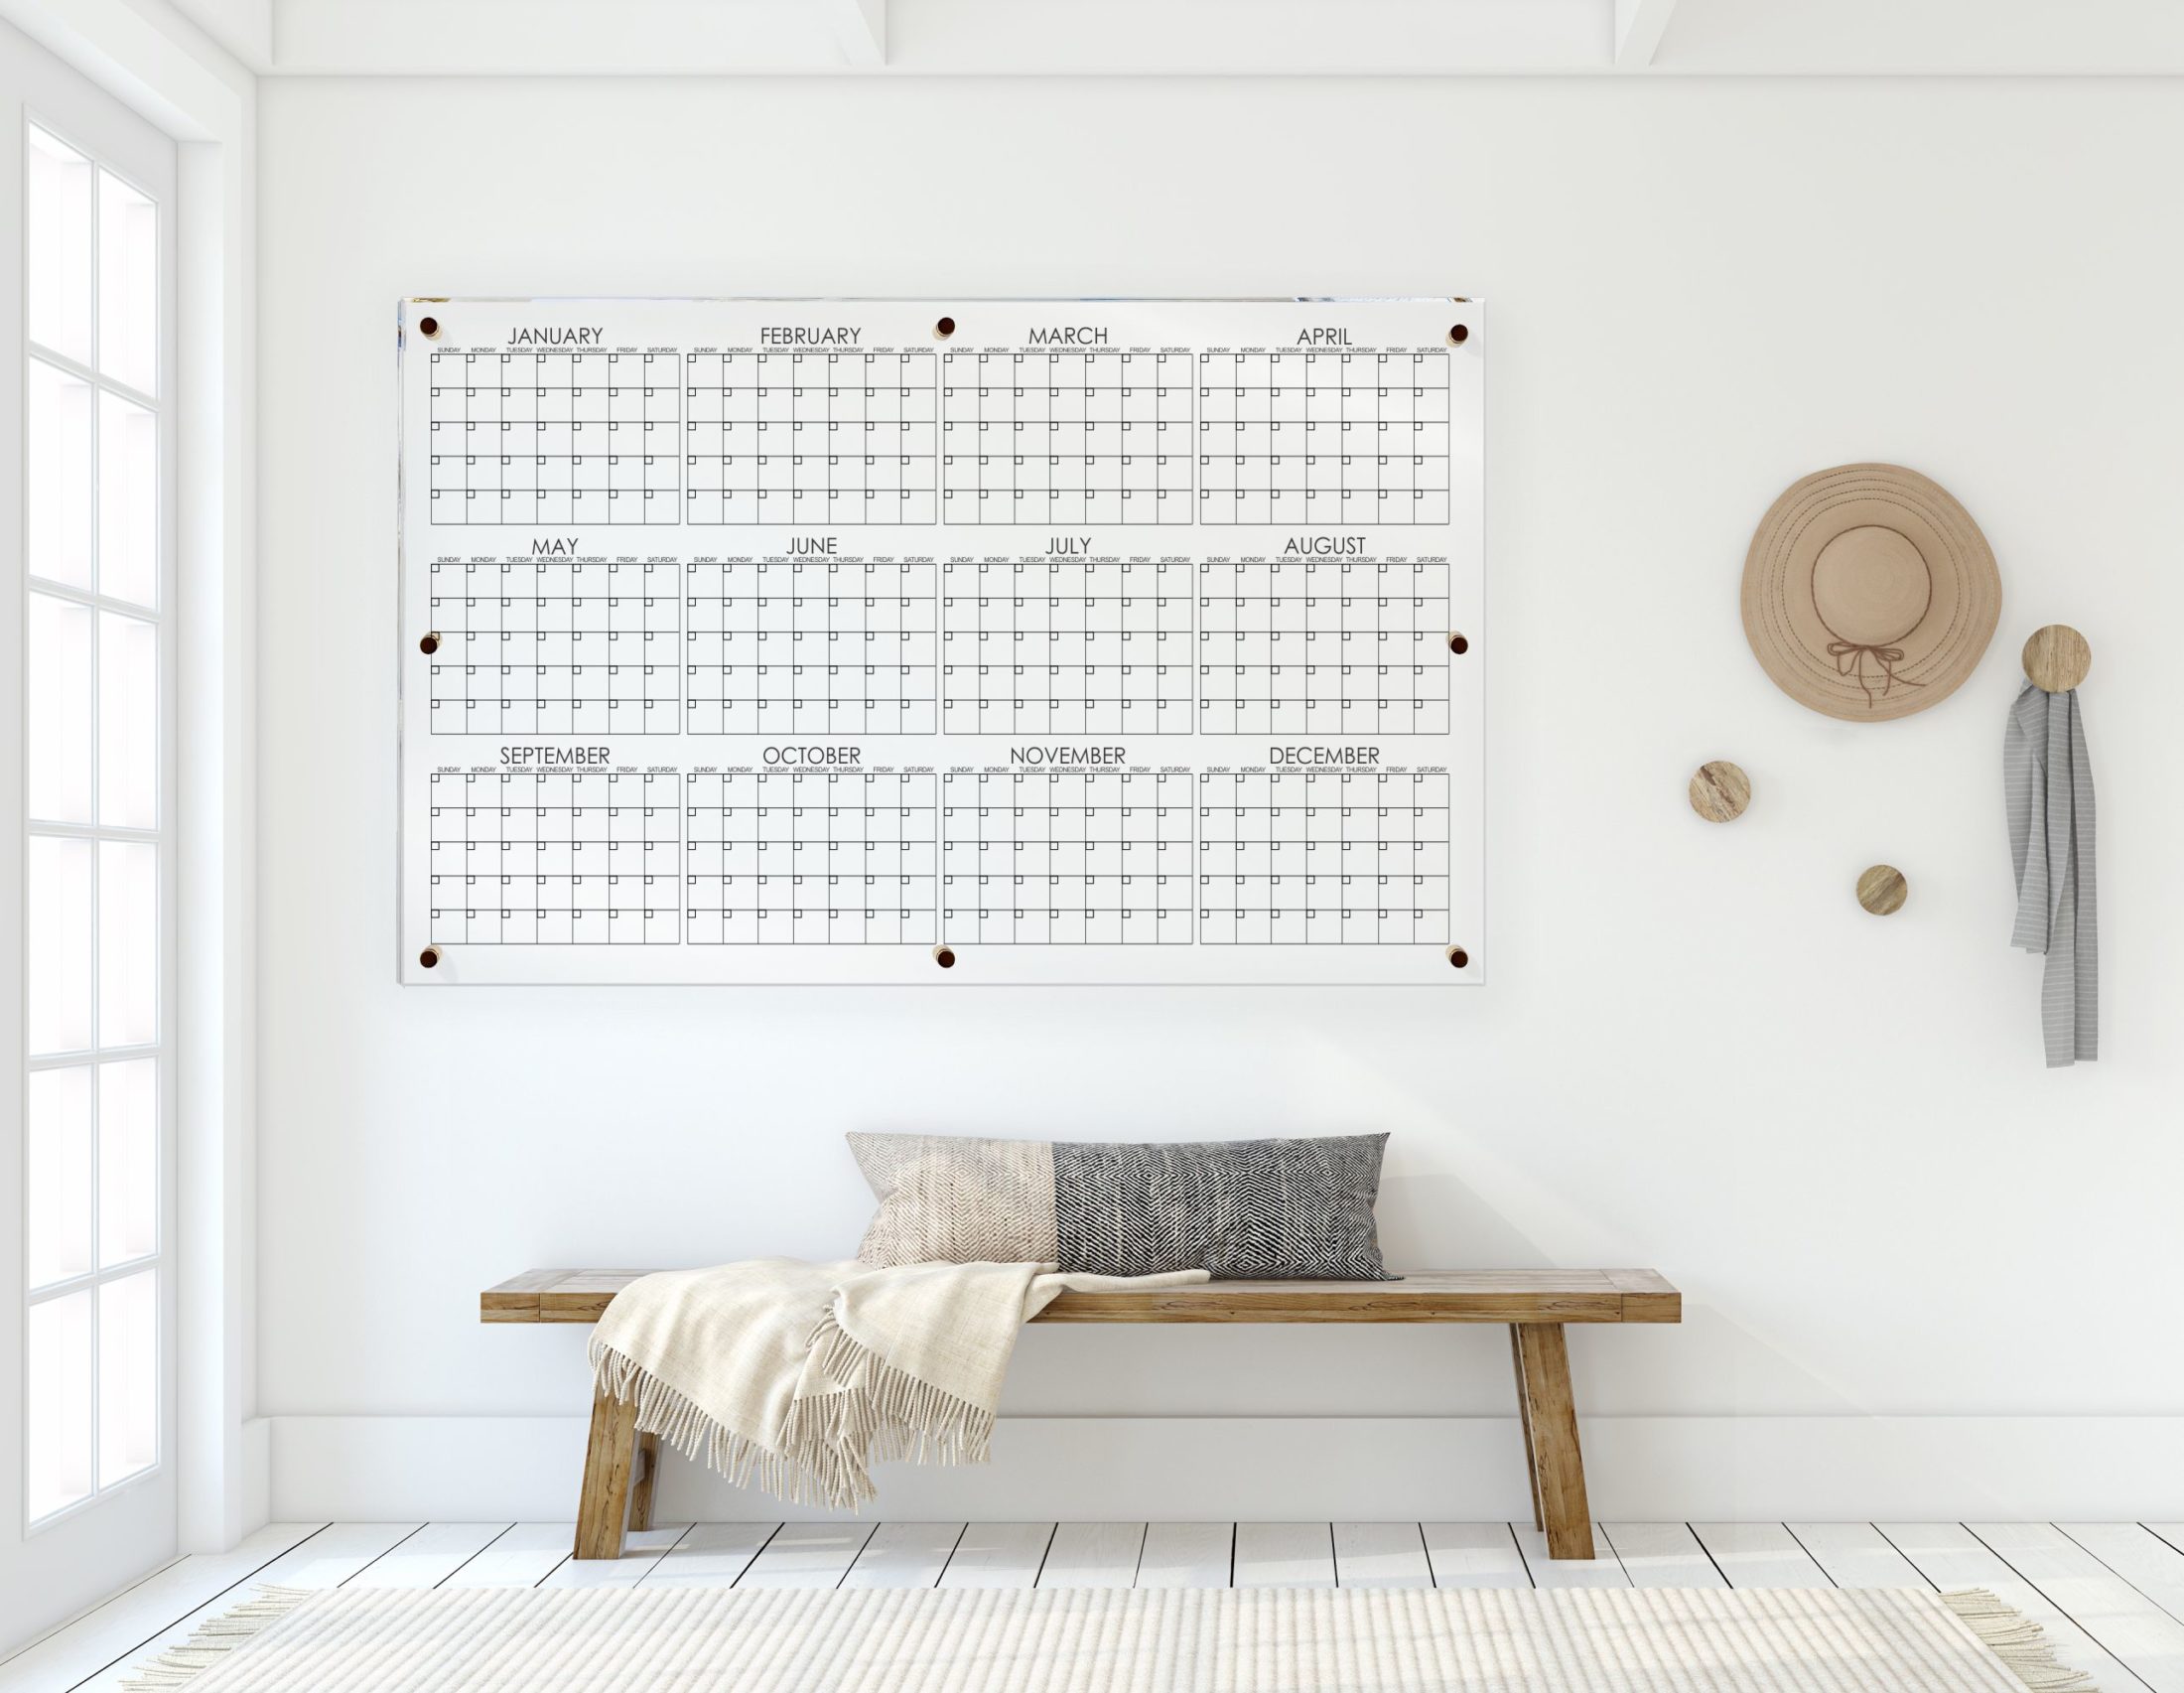 diy-large-wall-calendar-see-all-12-months-at-one-time